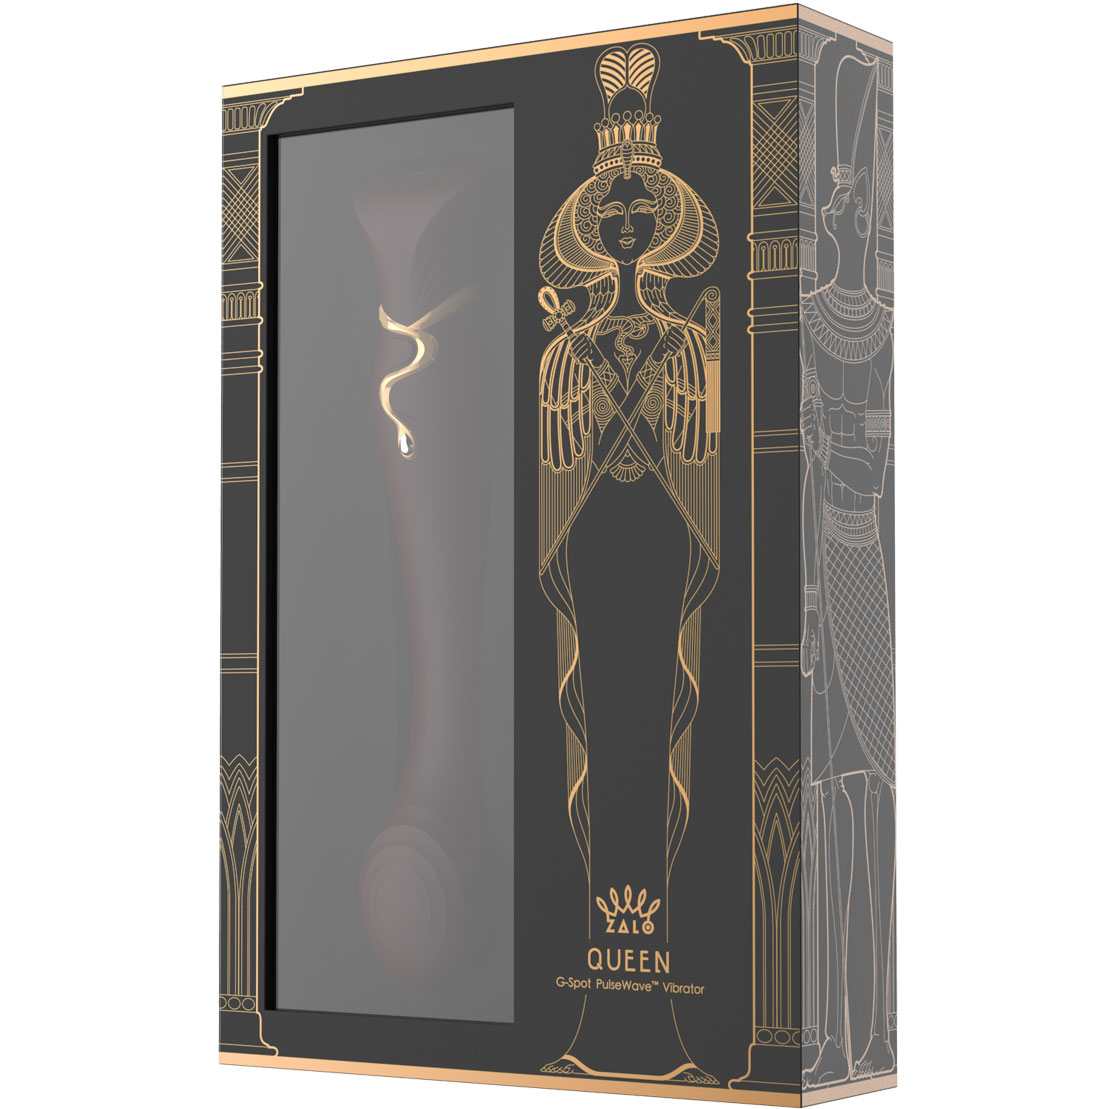 ZALO Queen Set Silicone Rechargeable G-Spot PulseWave Vibrator With Suction Sleeve - Packaging